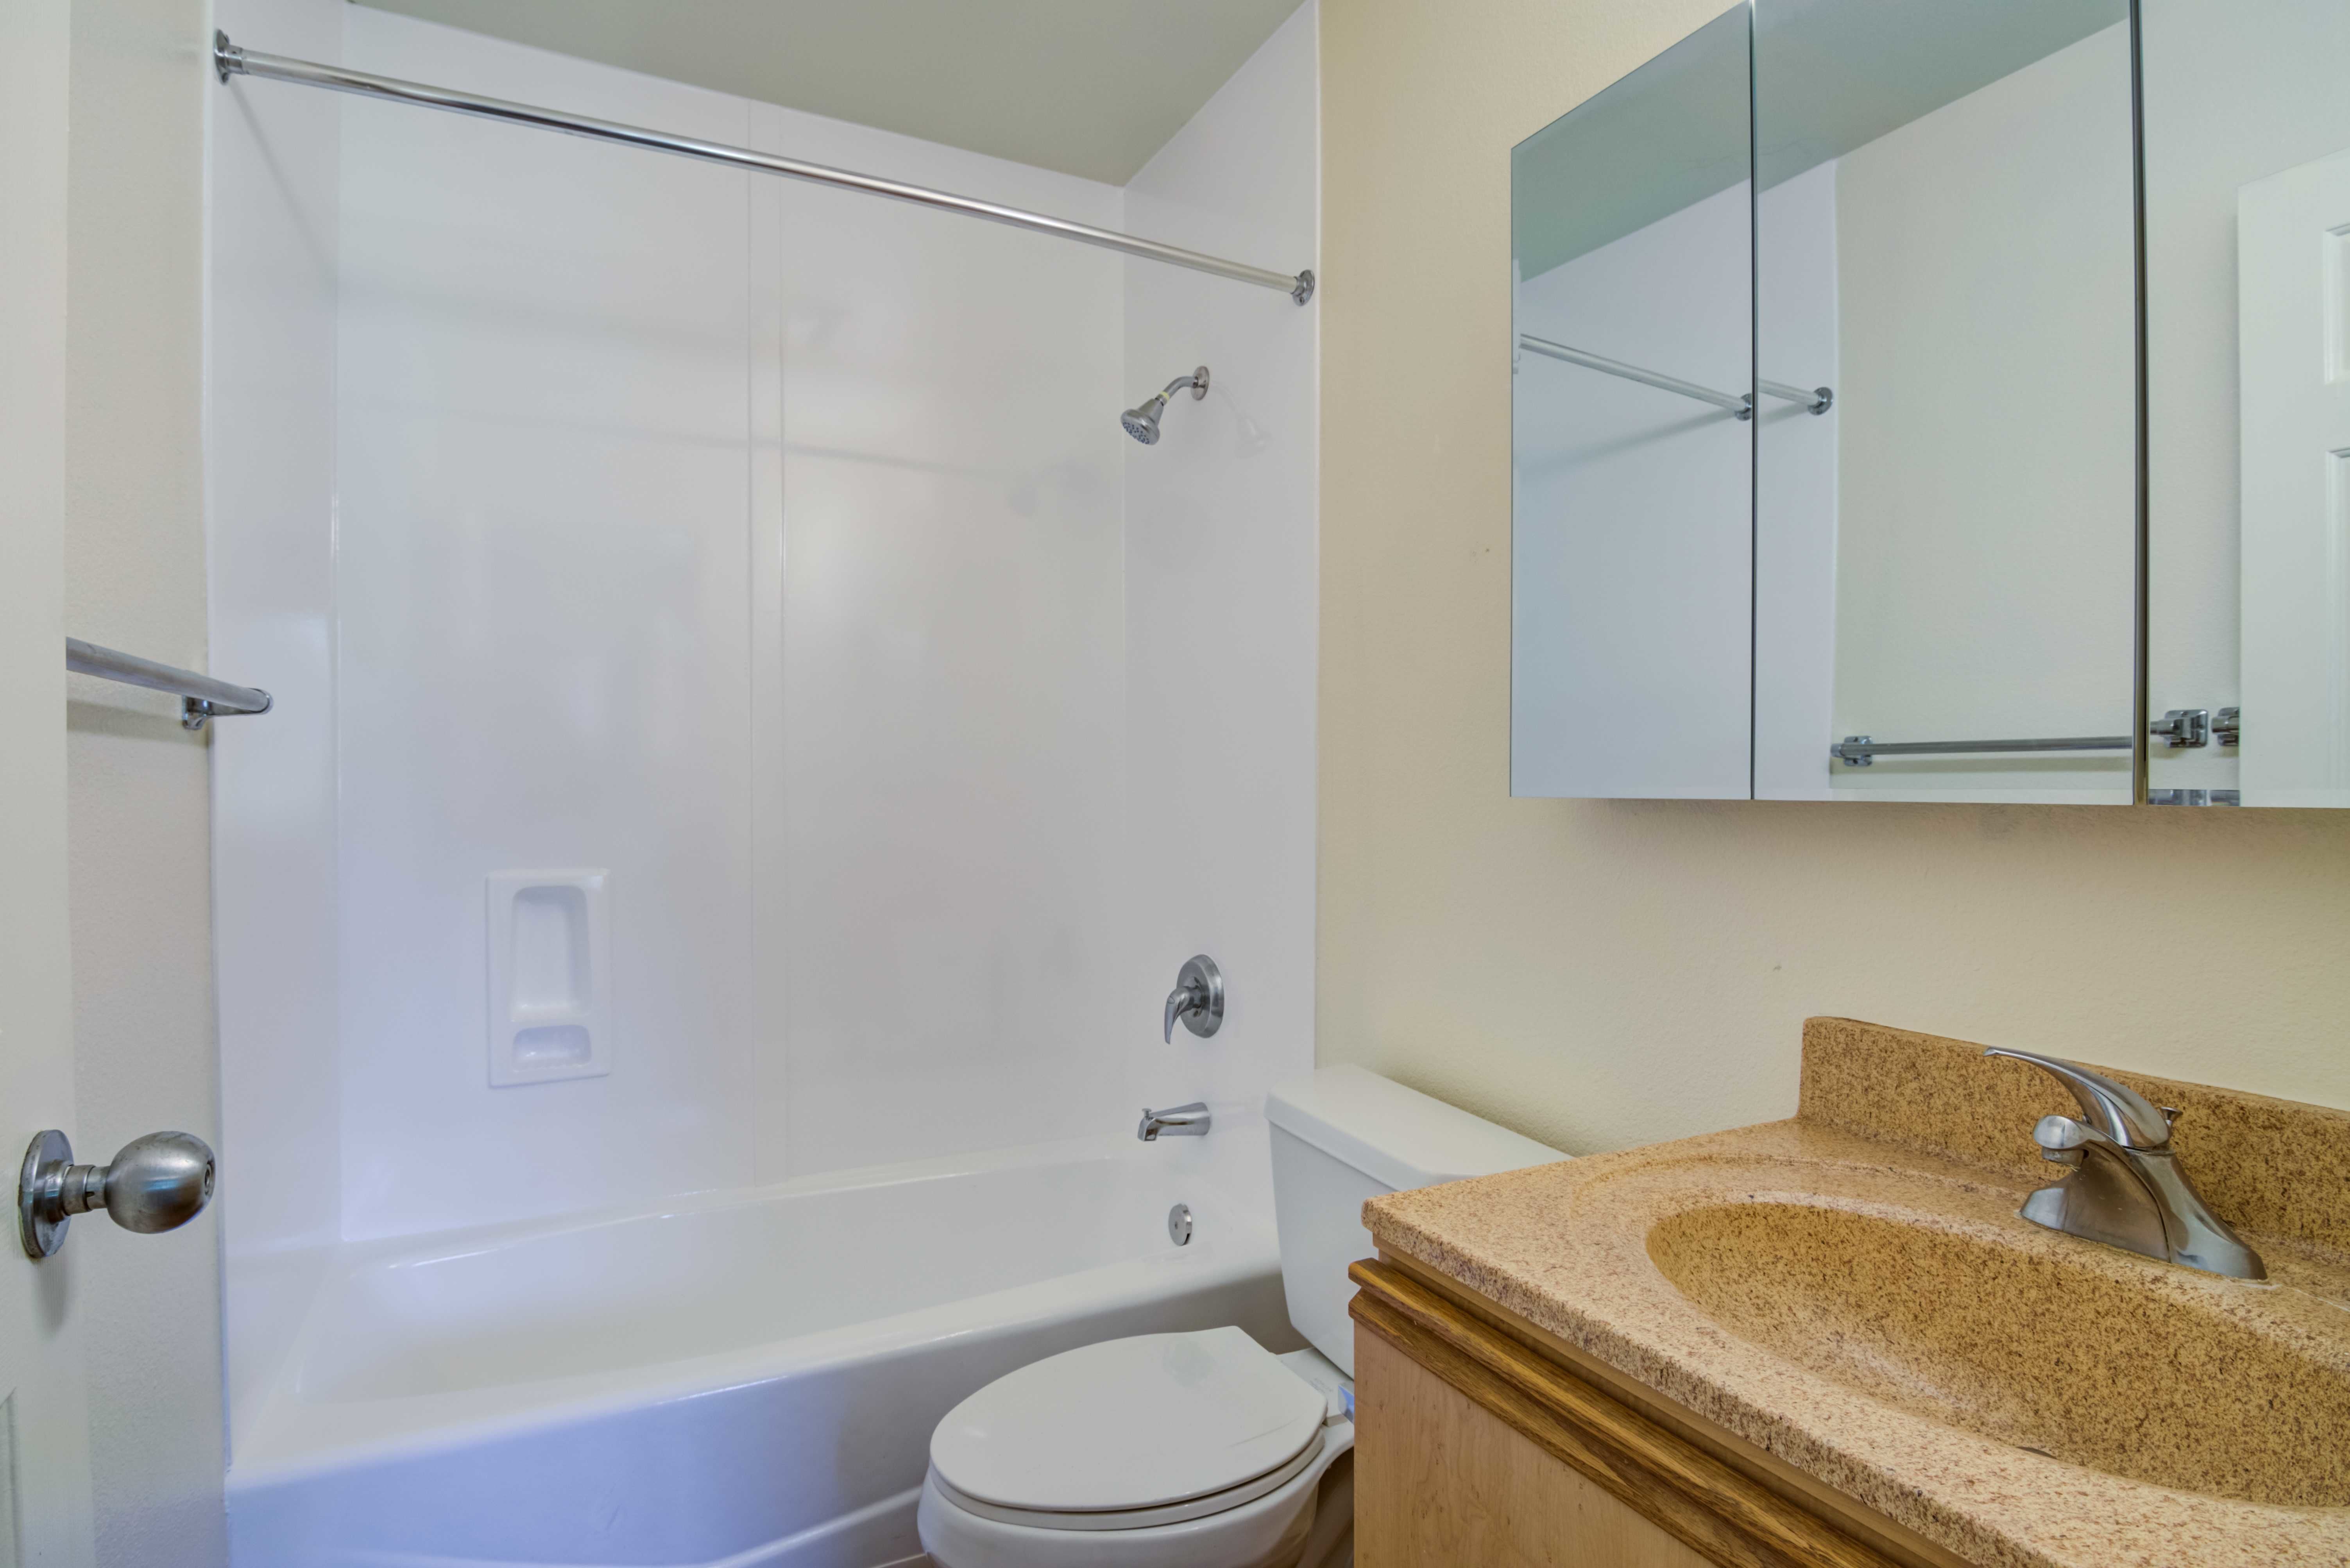 A bathroom in a home at San Onofre I in San Clemente, California